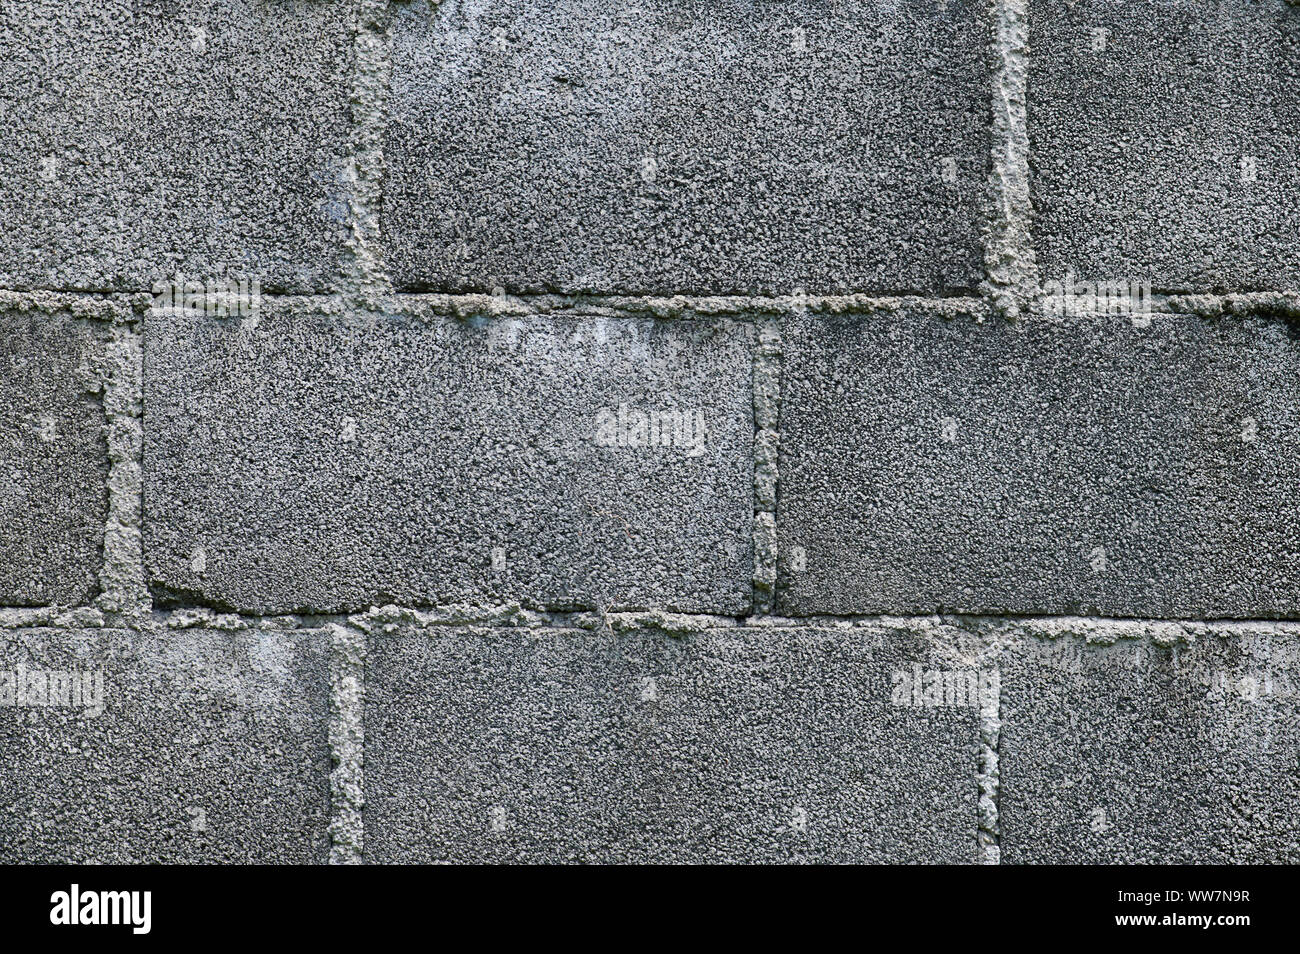 Grey brick solid wall pattern background close up view Stock Photo